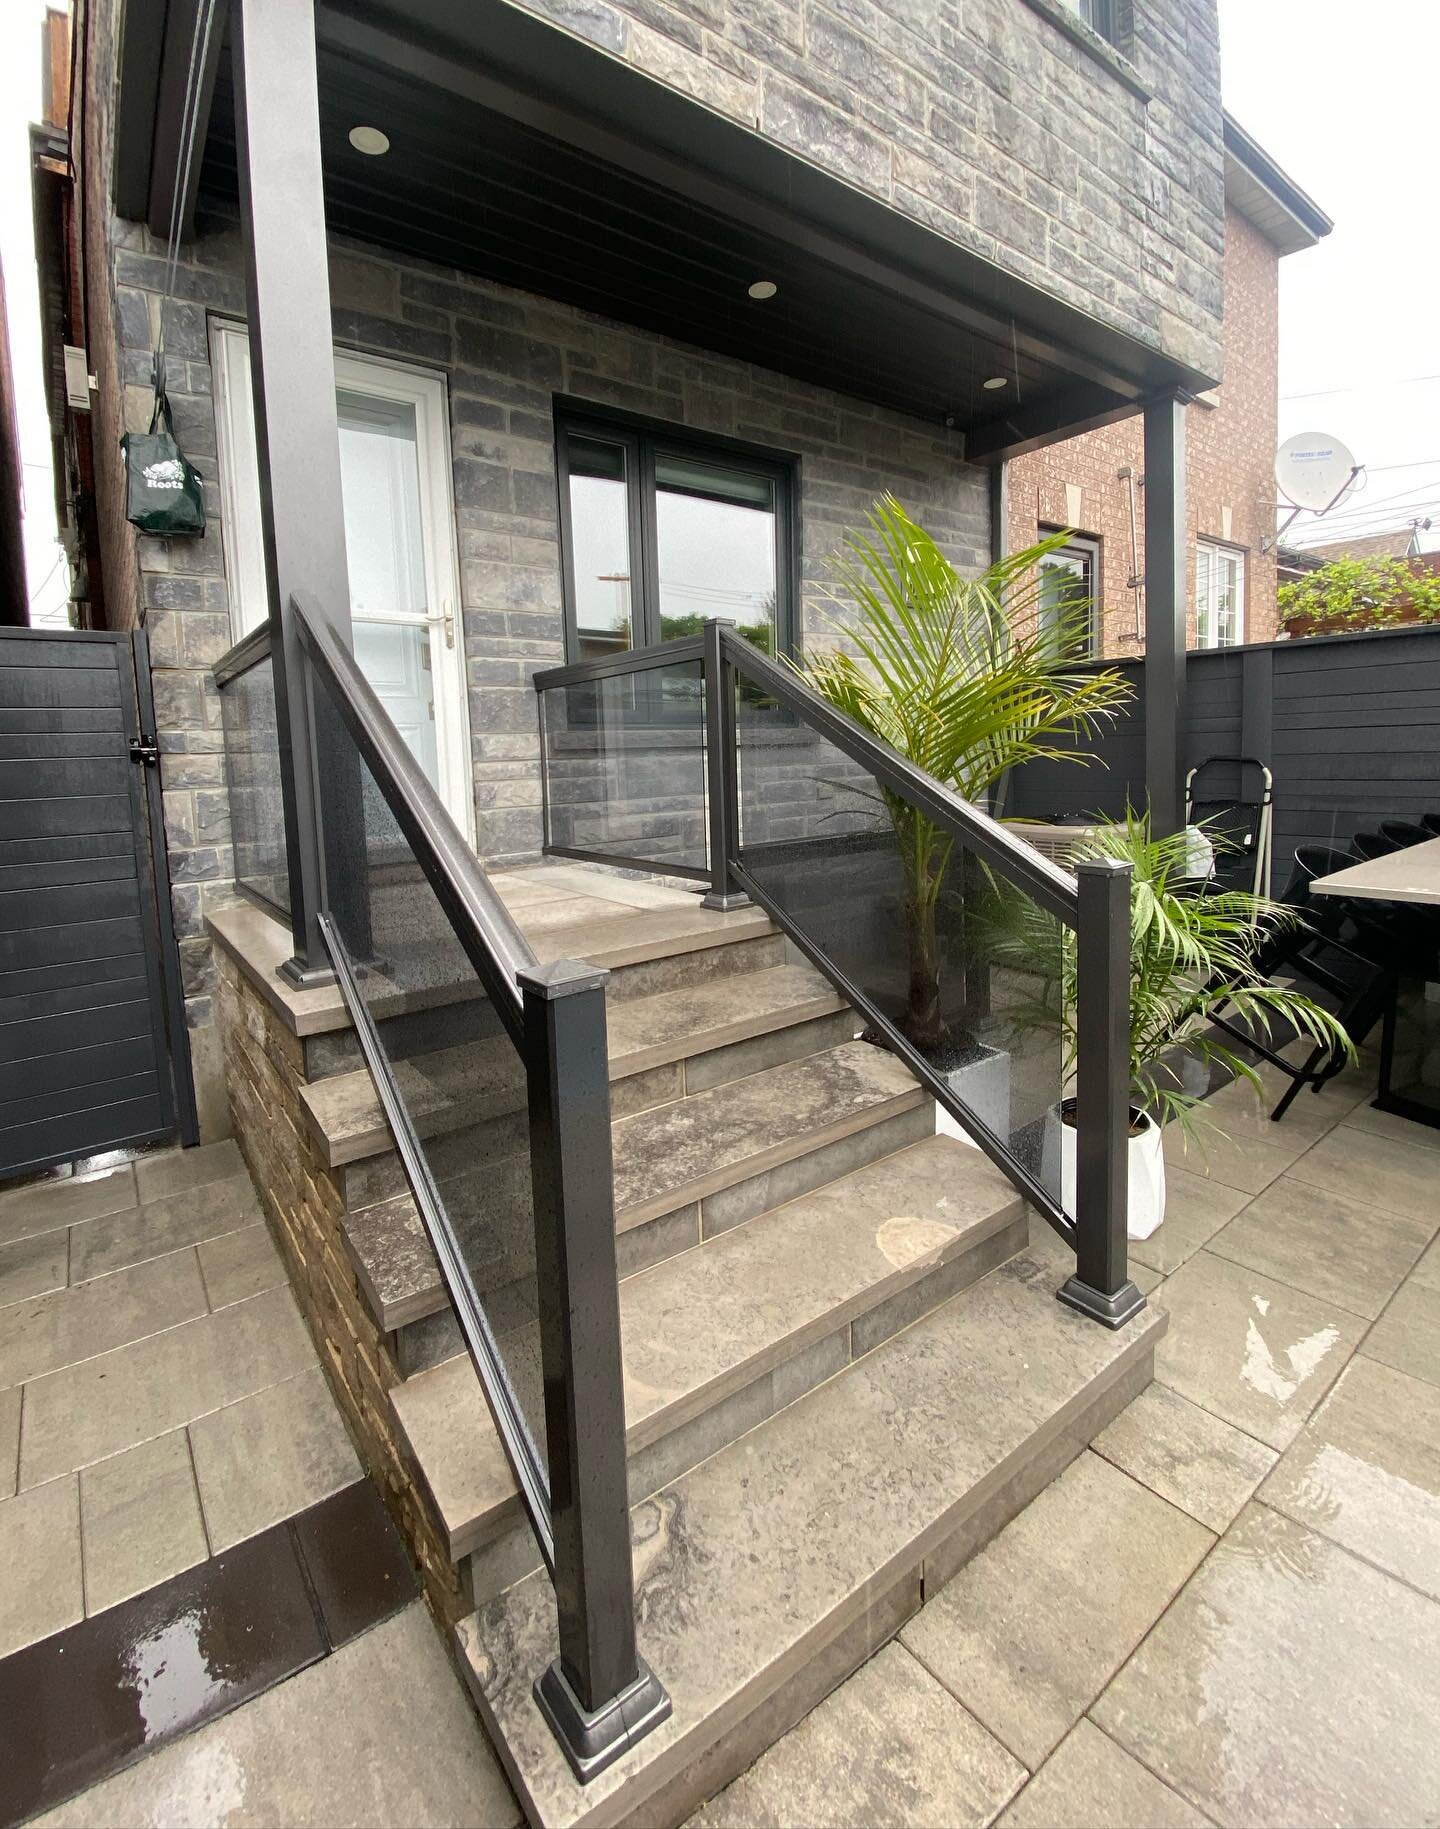 Another Beautiful Glass Railing installed in Toronto
🤌🏼👀
Style: GR1 
Glass: Grey
Post: 3&rdquo; 
Colour: Pewter
&bull;
&bull;
&bull;
&bull;
#glassrailing #toronto #homeimprovement #backyarddesign